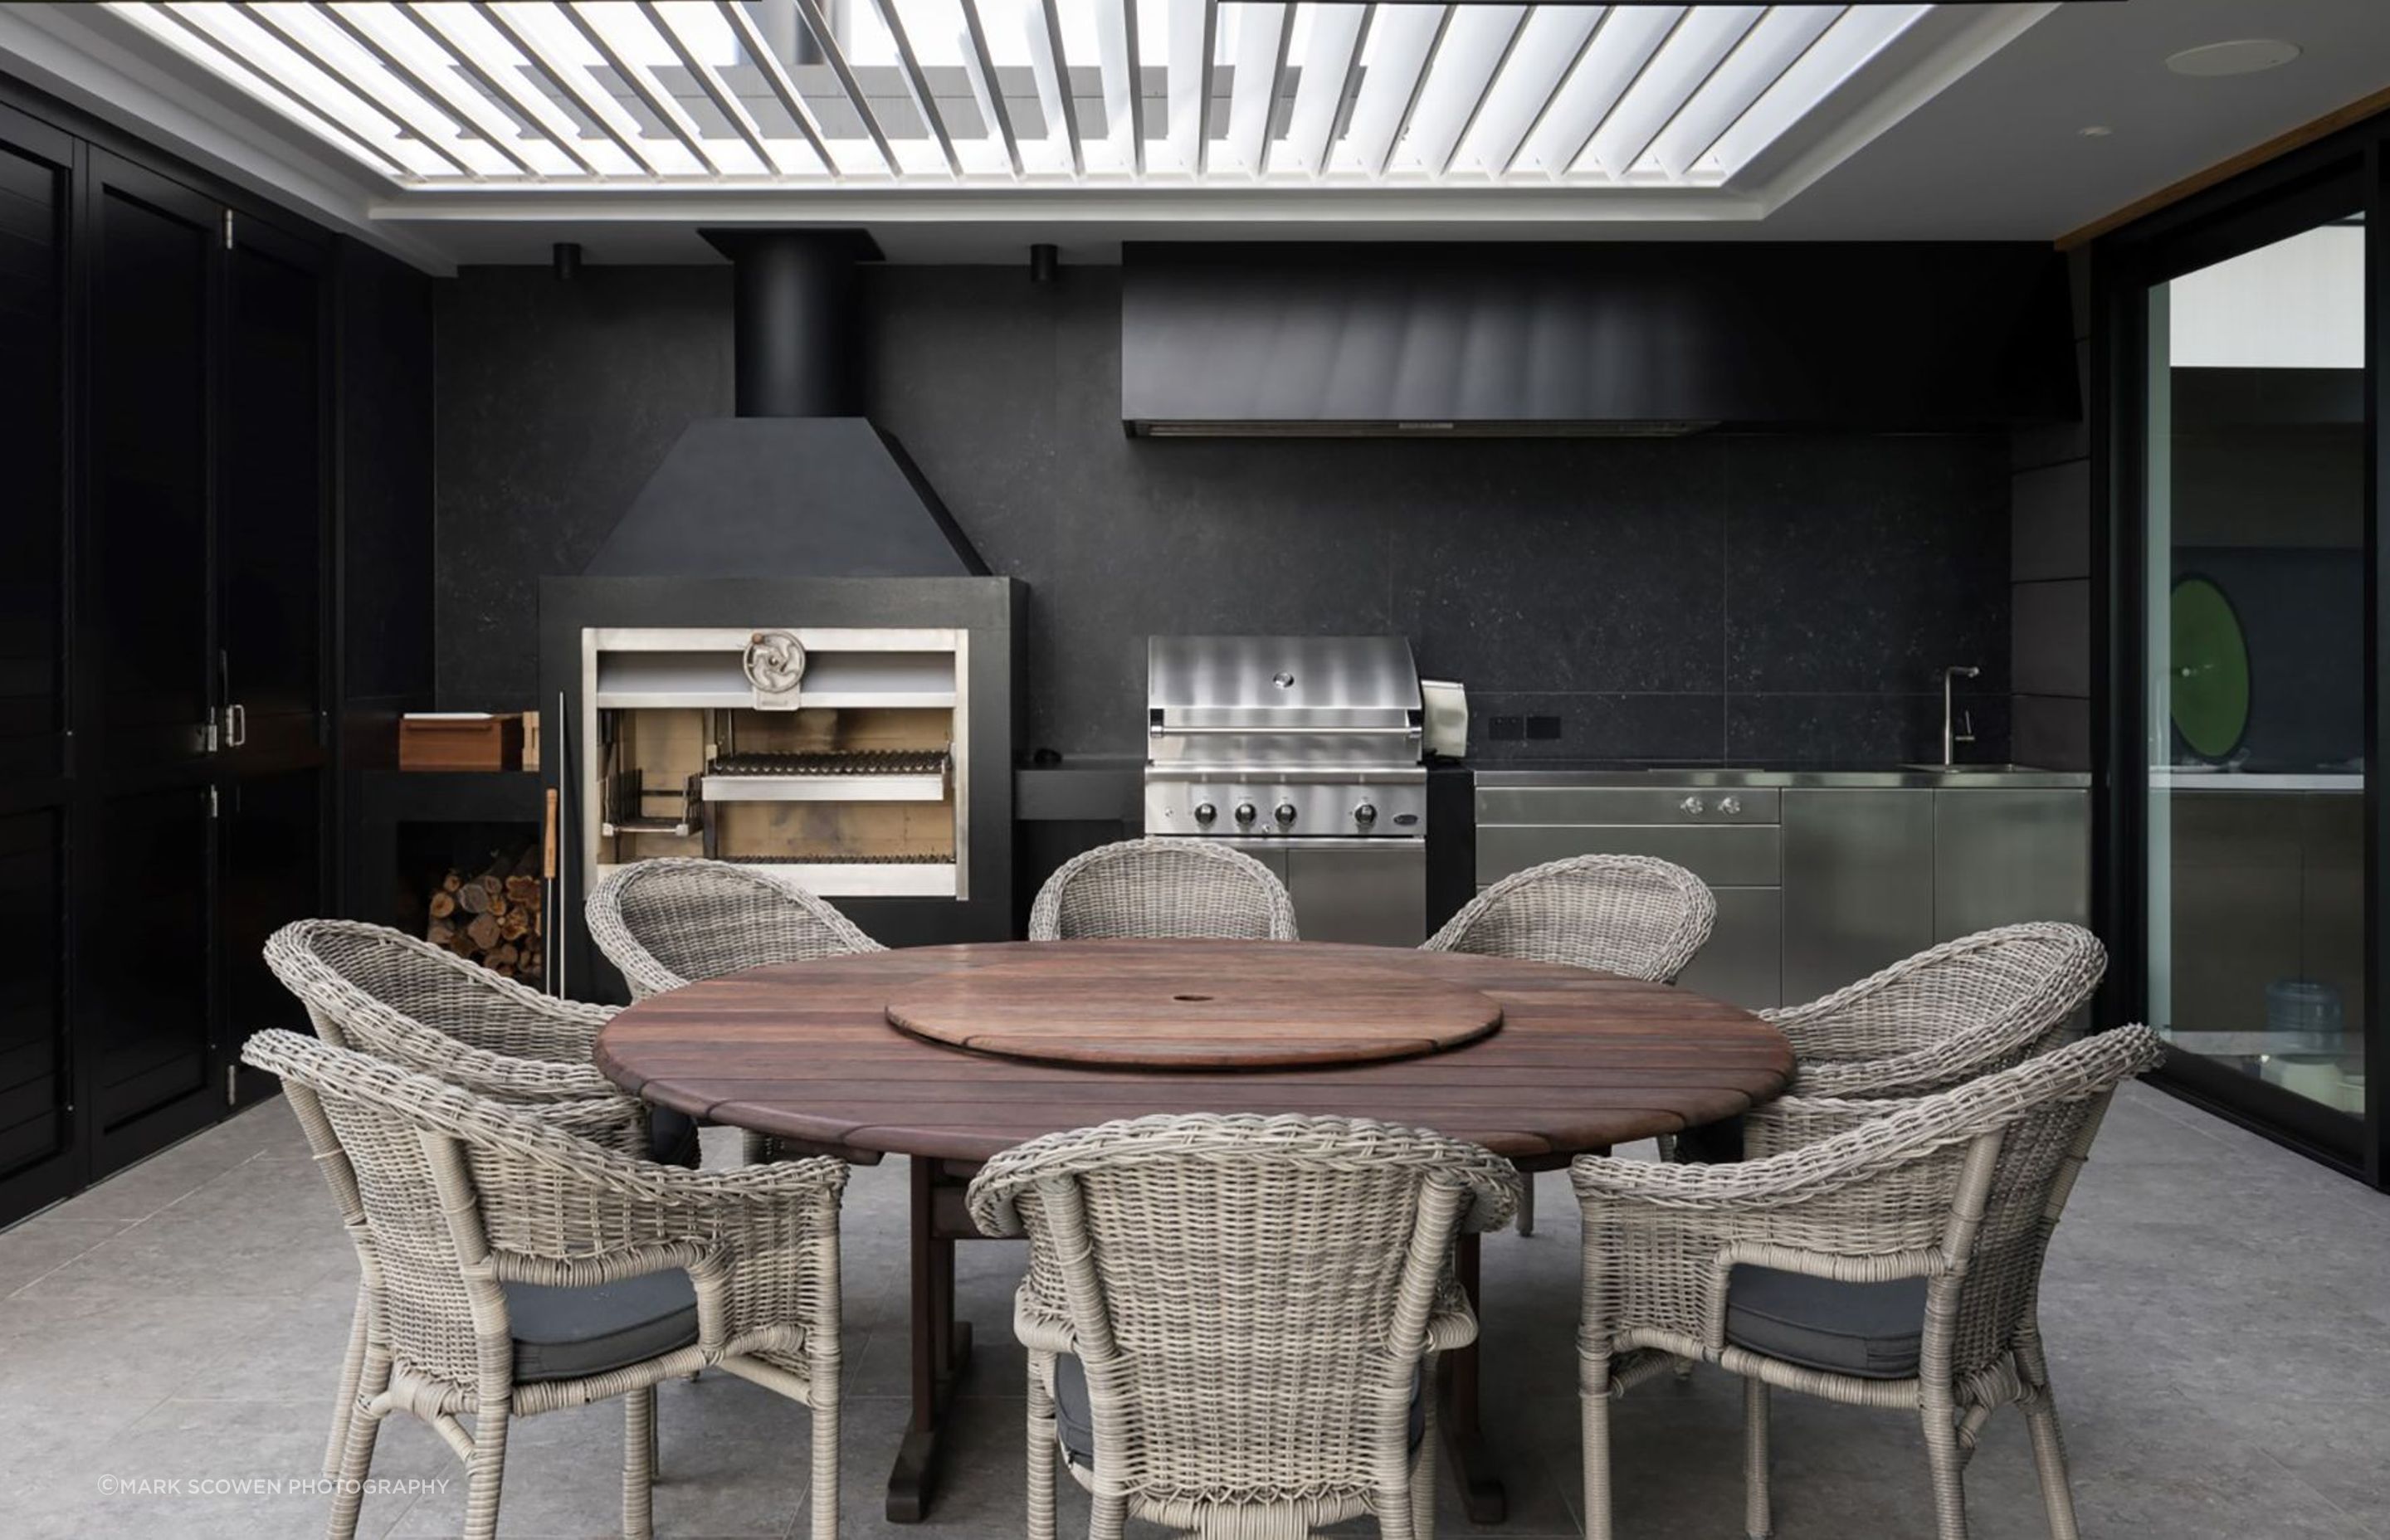 The outdoor room is directly linked to the kitchen and is the perfect place for entertaining, with adjustable overhead louvres providing light and shade.